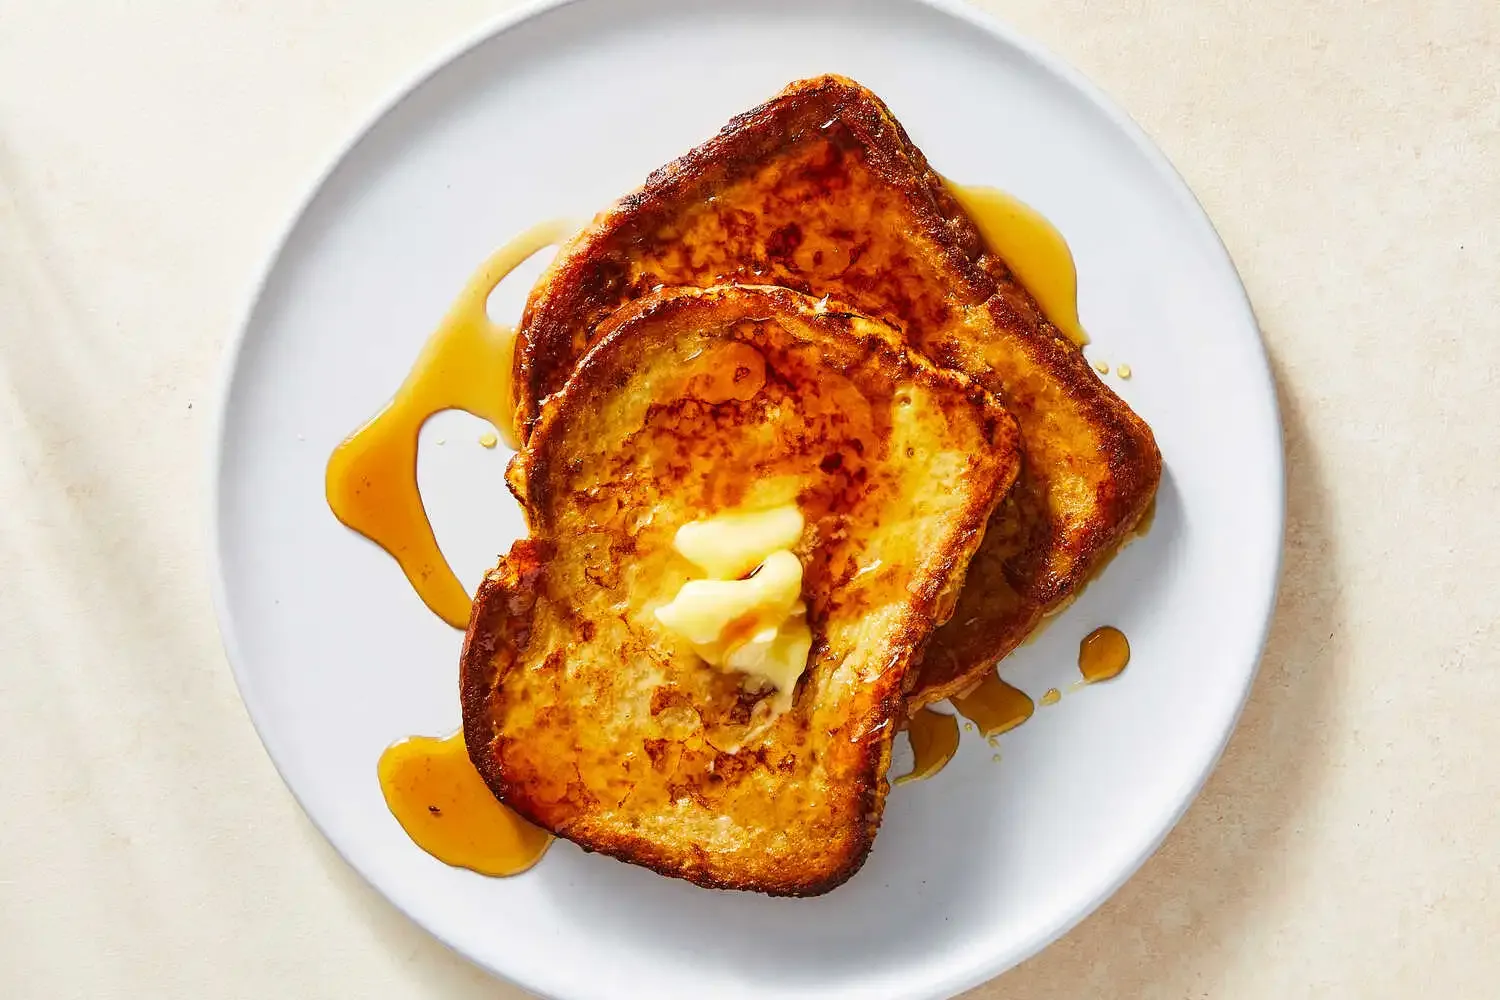 FRENCH TOAST